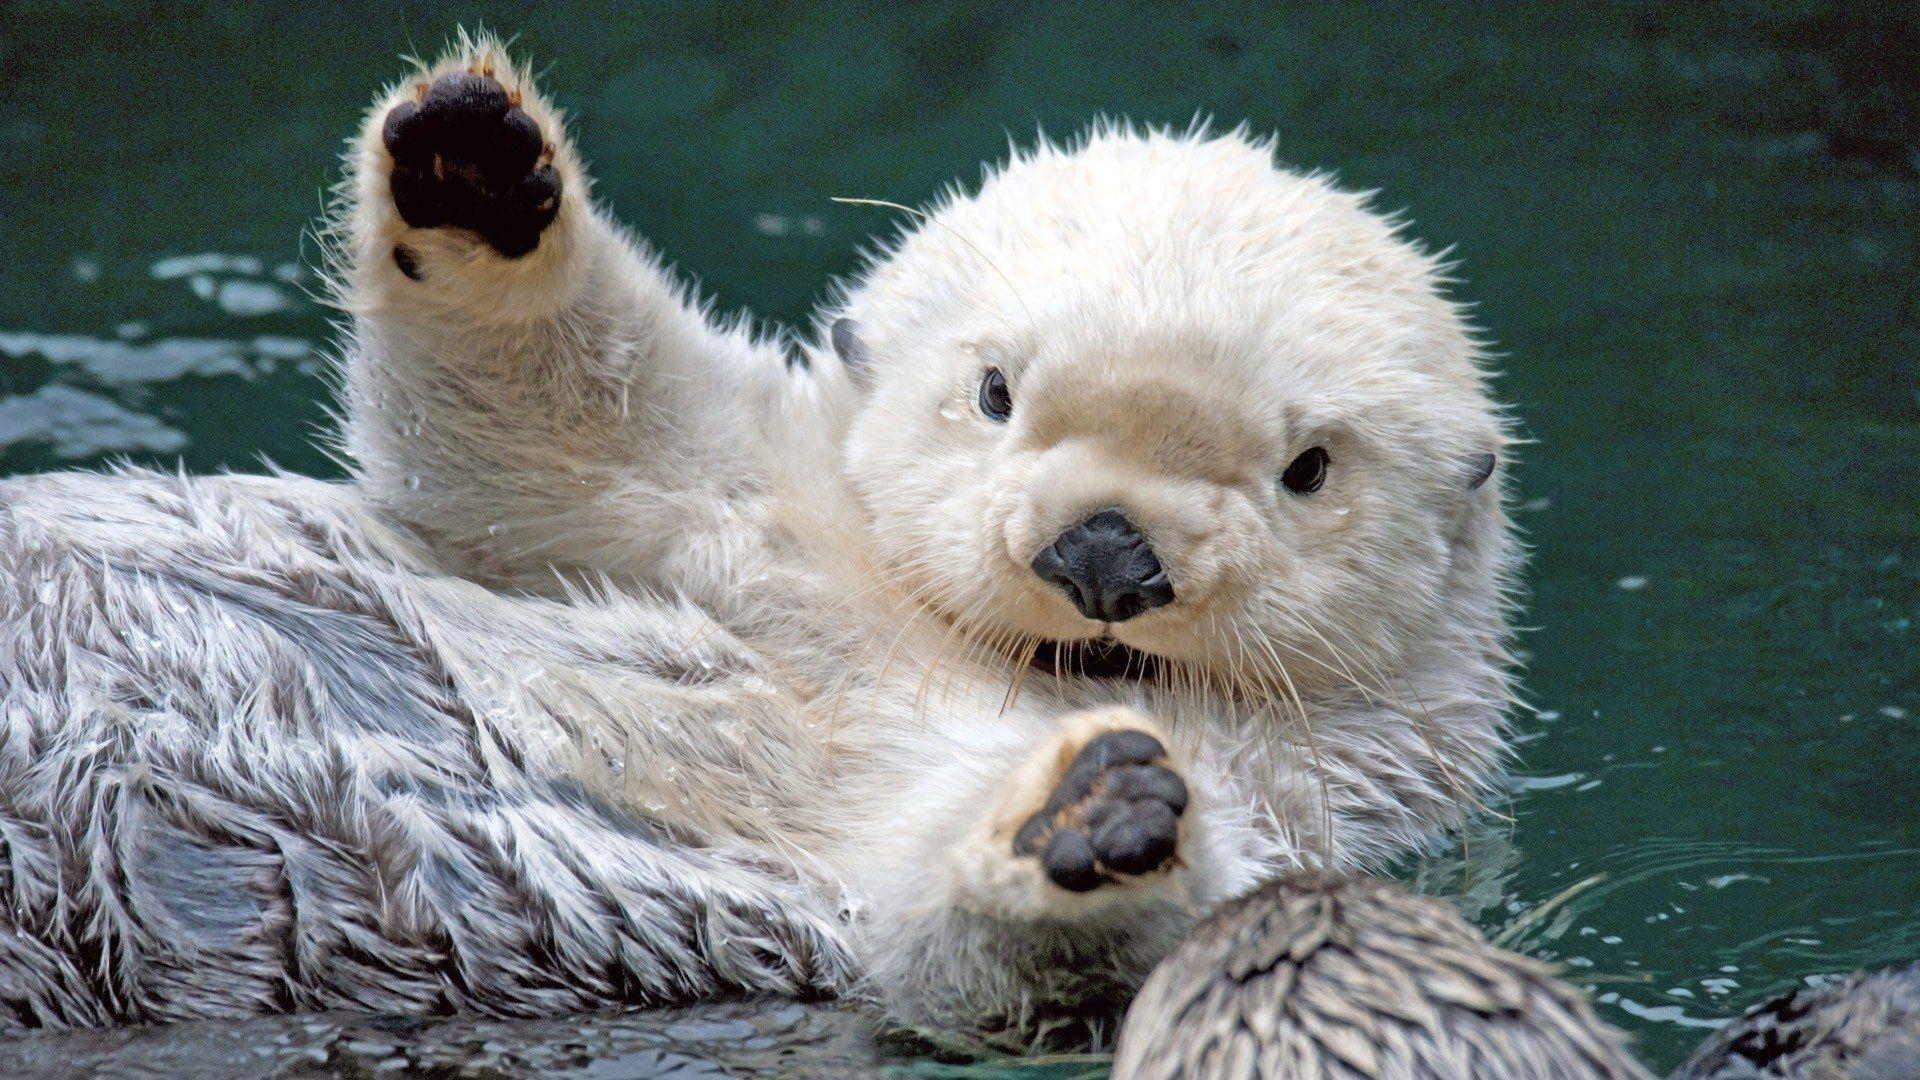 Cute Sea Otter Wallpapers - Top Free Cute Sea Otter Backgrounds ...